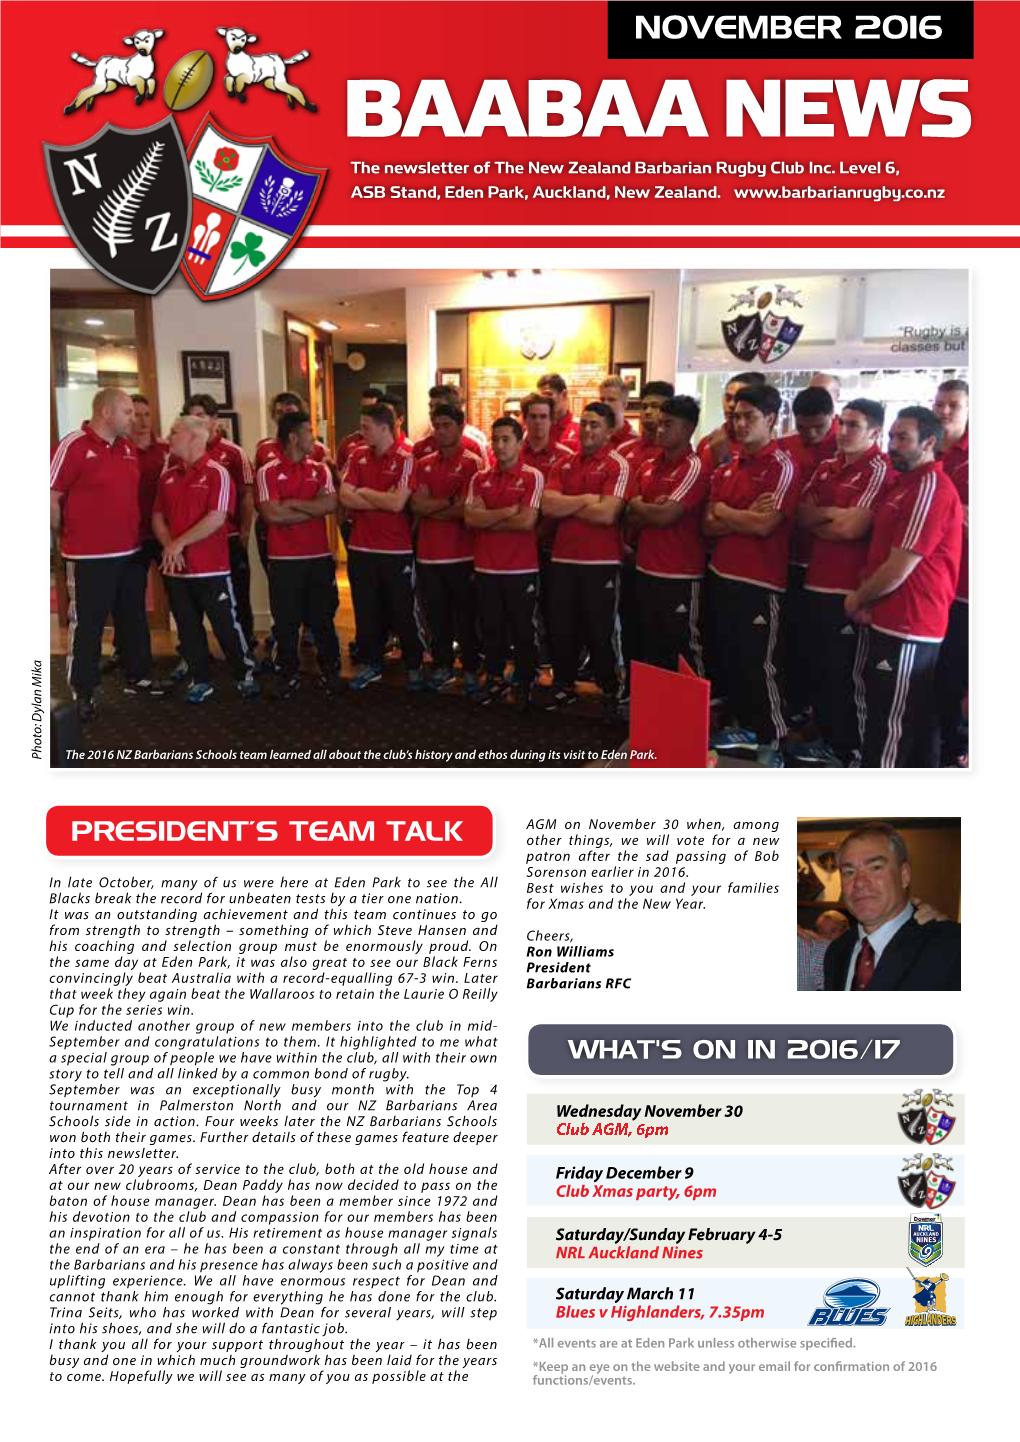 BAABAA NEWS the Newsletter of the New Zealand Barbarian Rugby Club Inc